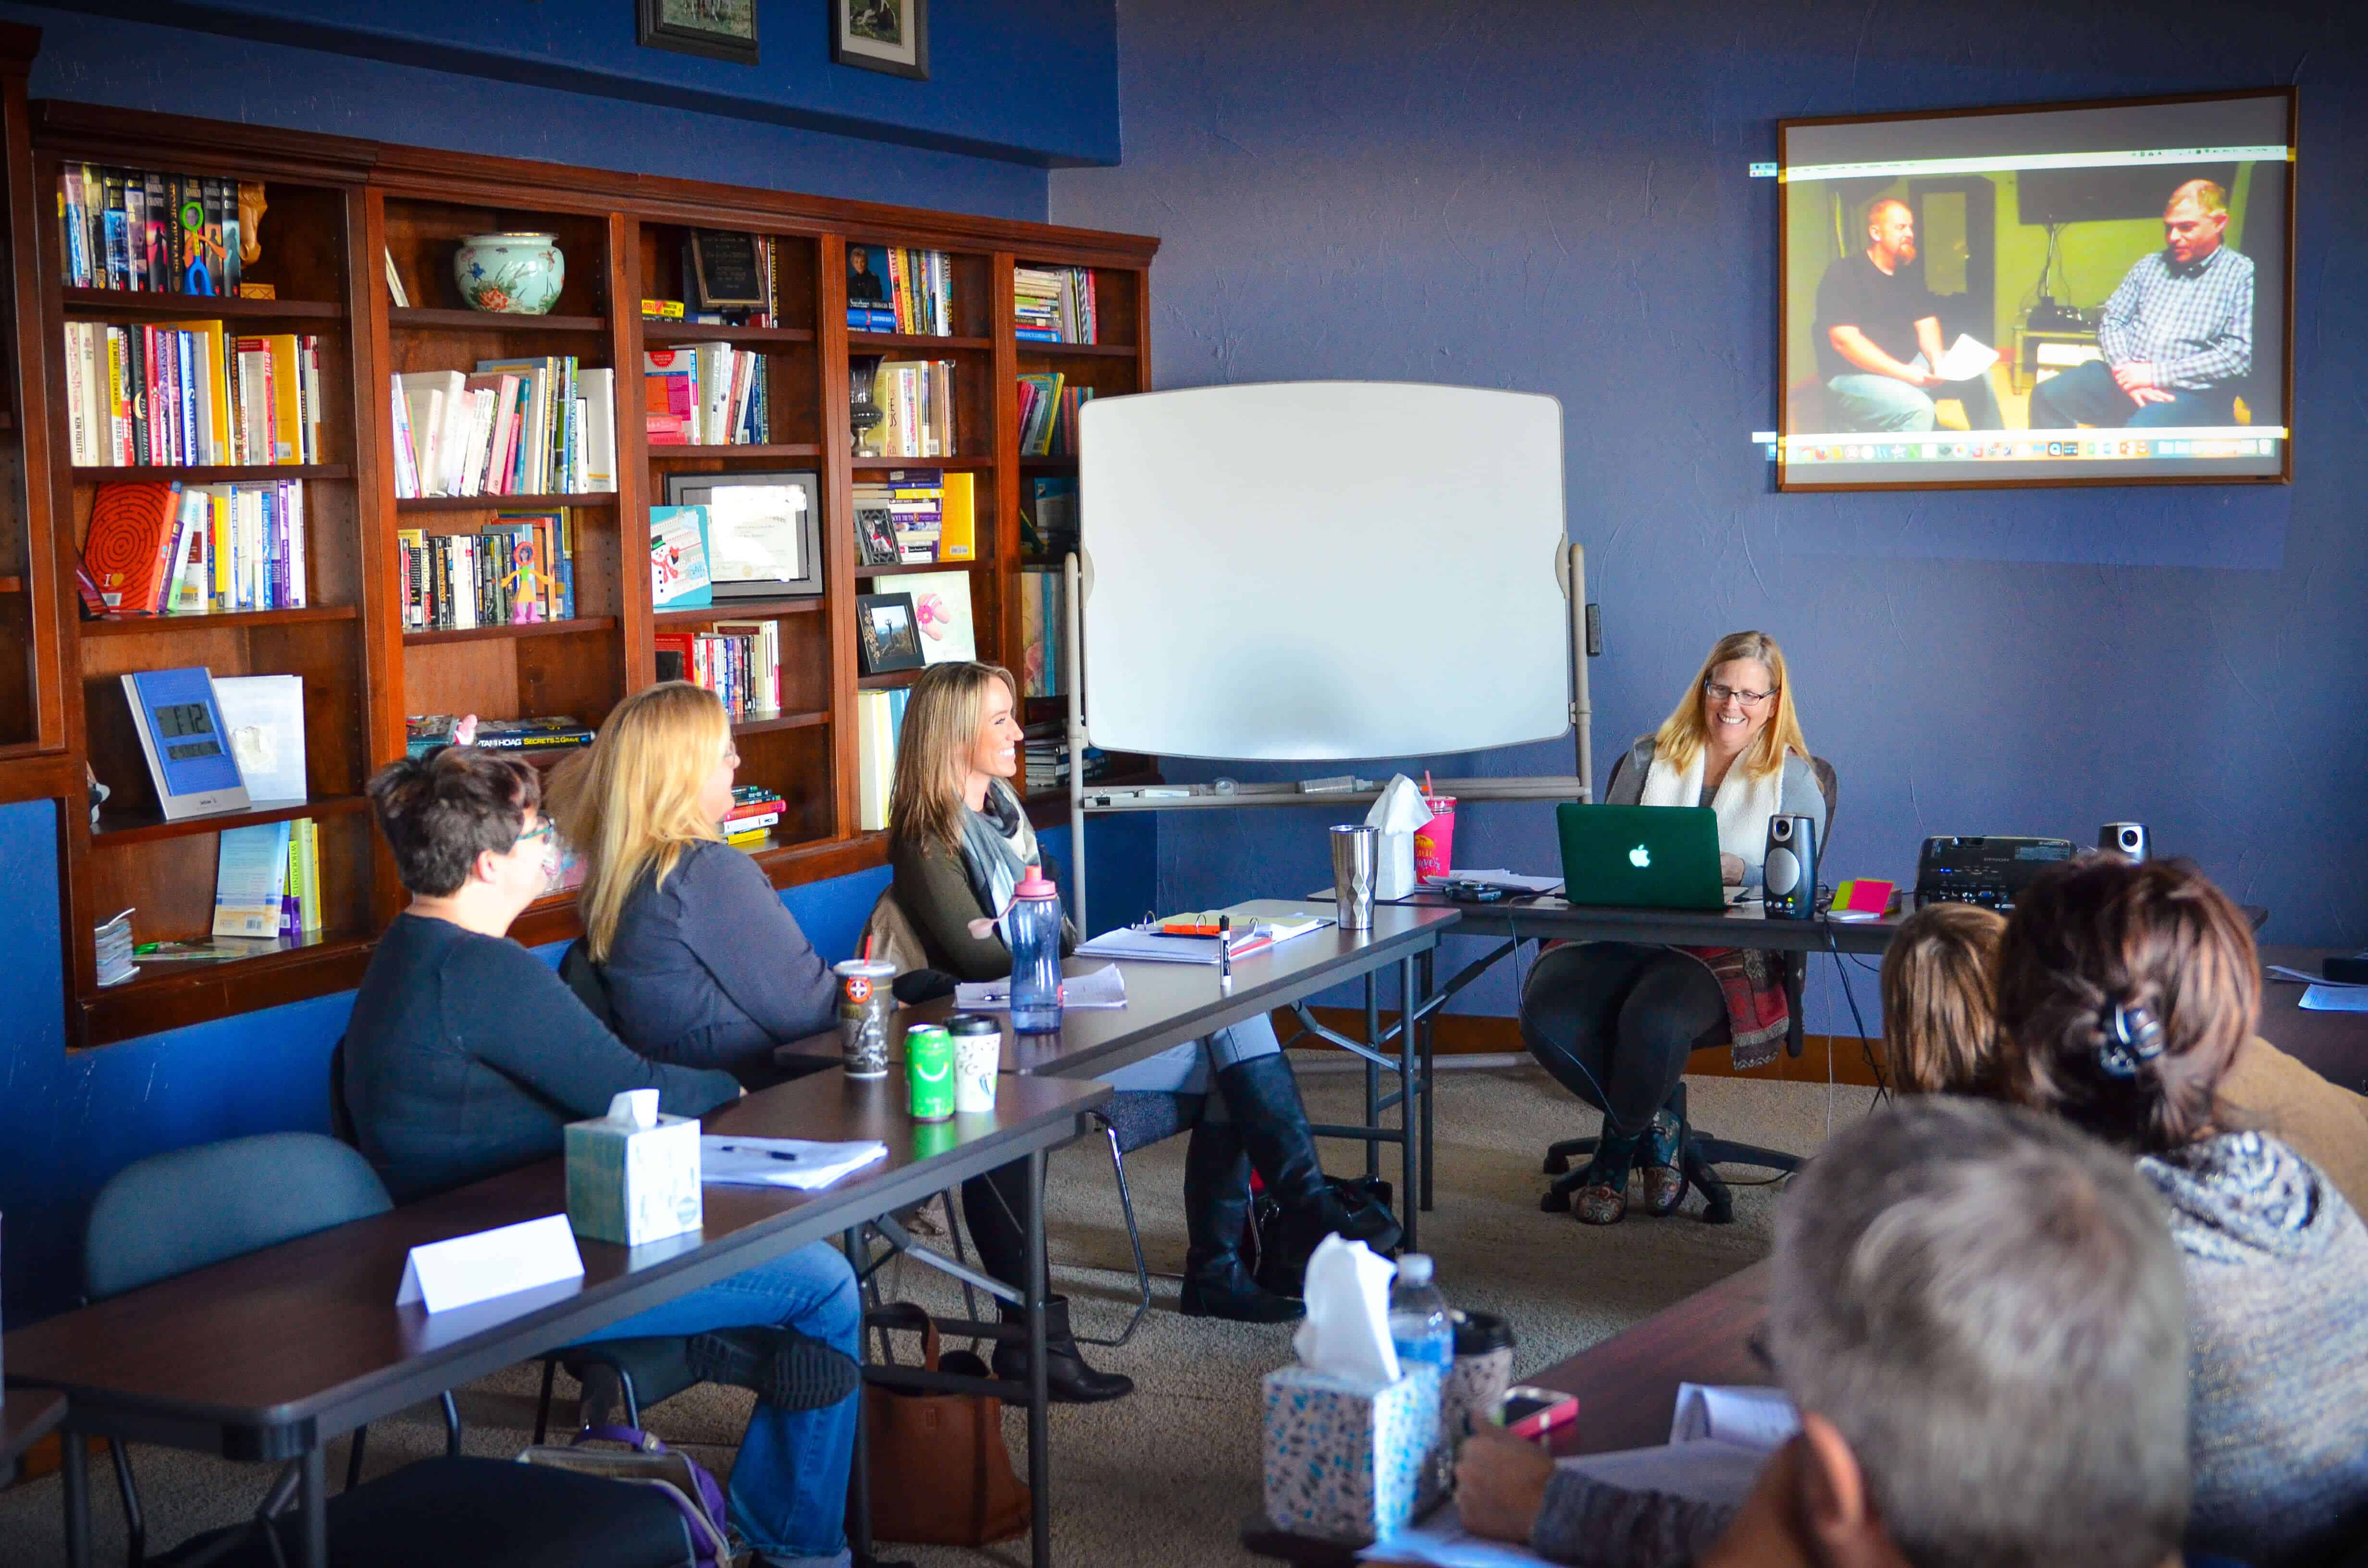 On site addiction counselor training course in Colorado.